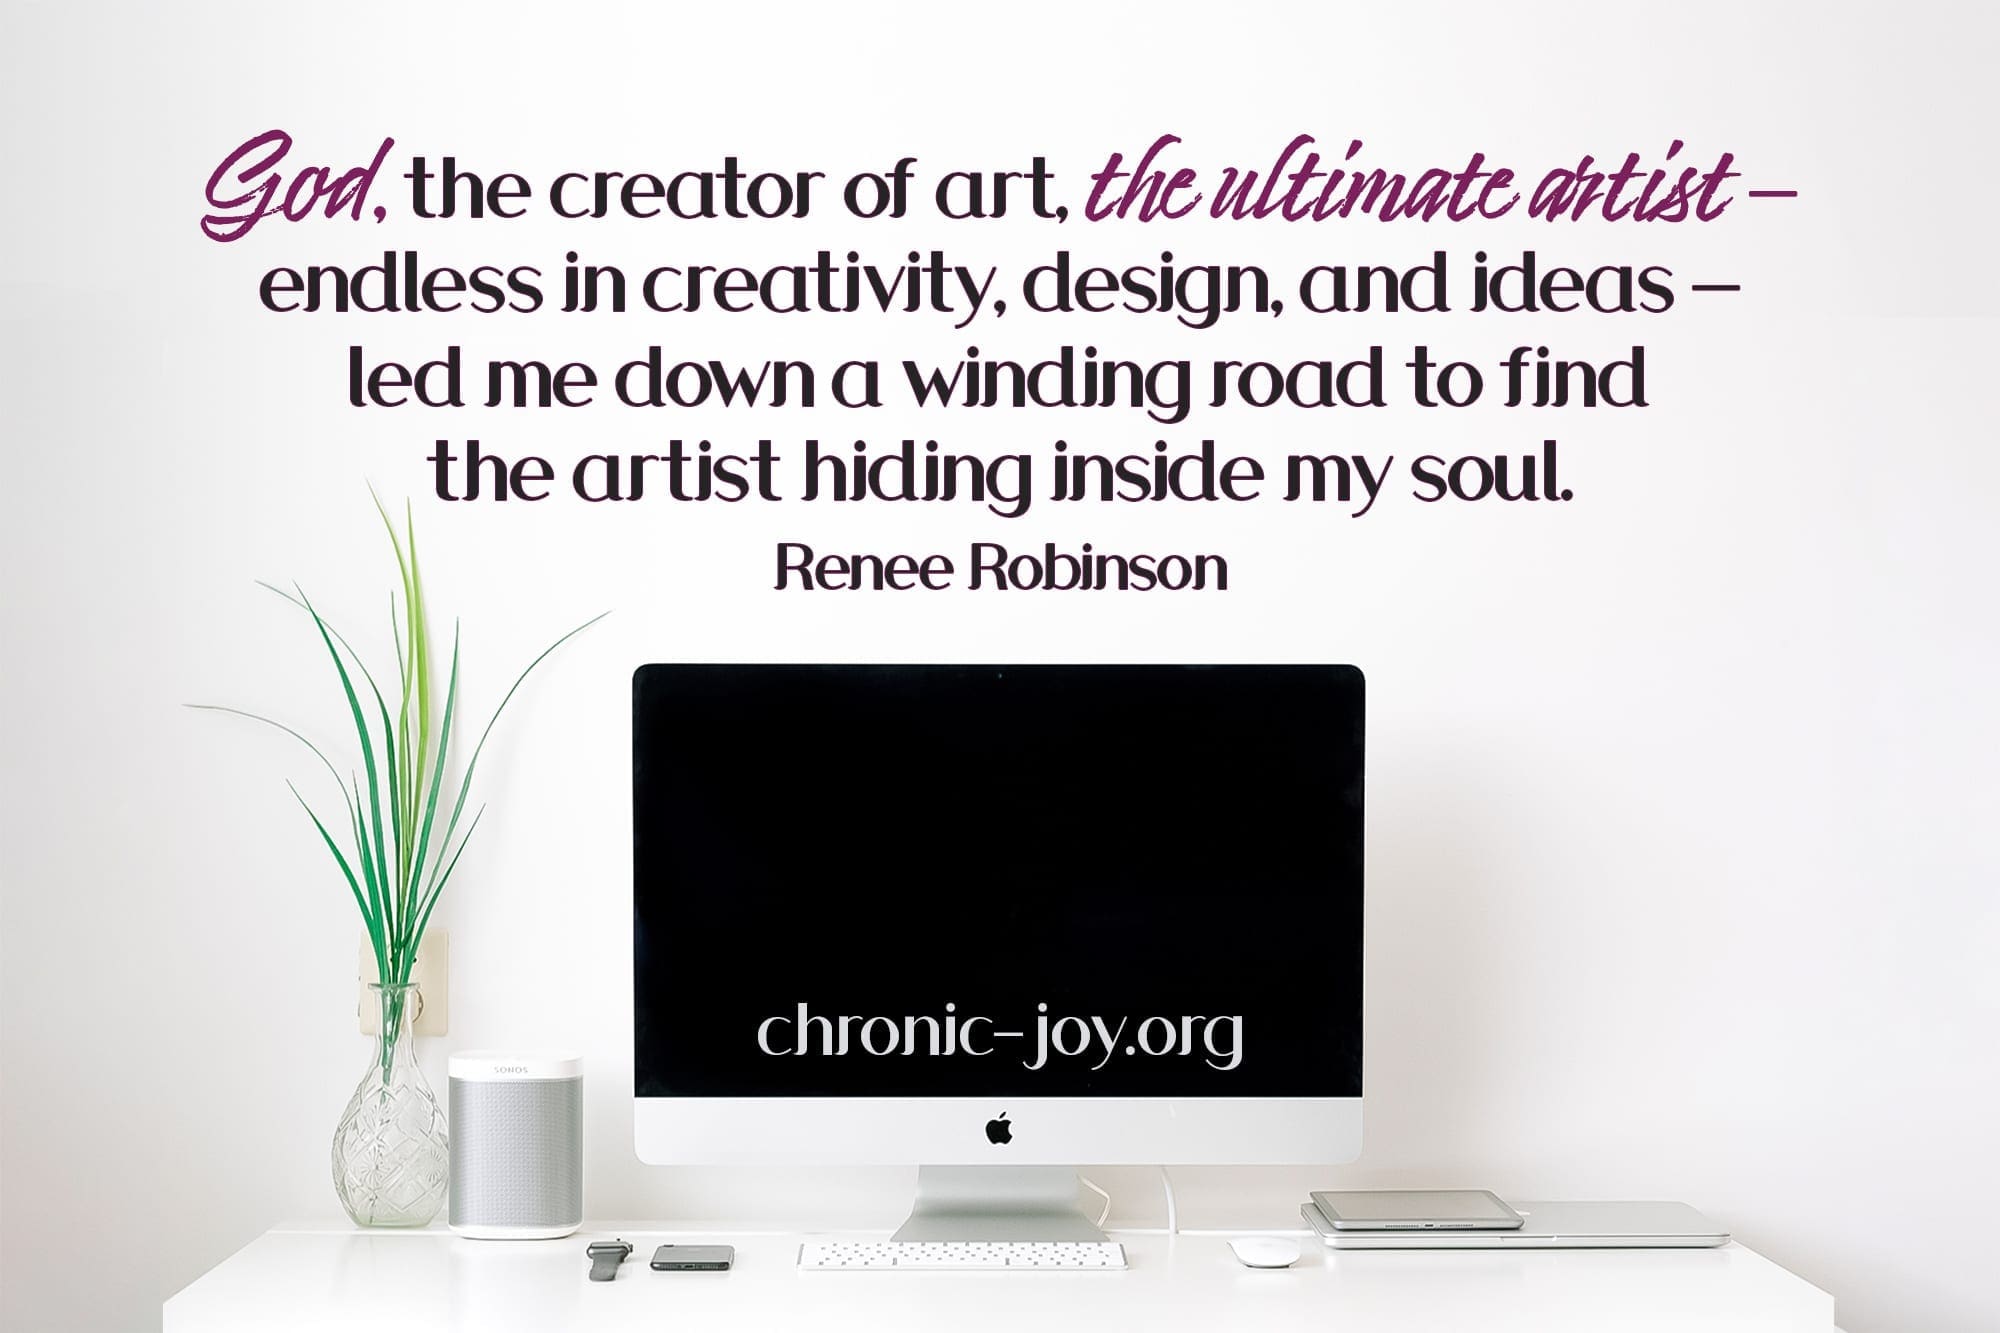 "God, the creator of art, the ultimate artist--endless in creativity, design, and ideas--led me down a winding road to find the artist hiding inside my soul." Renee Robinson